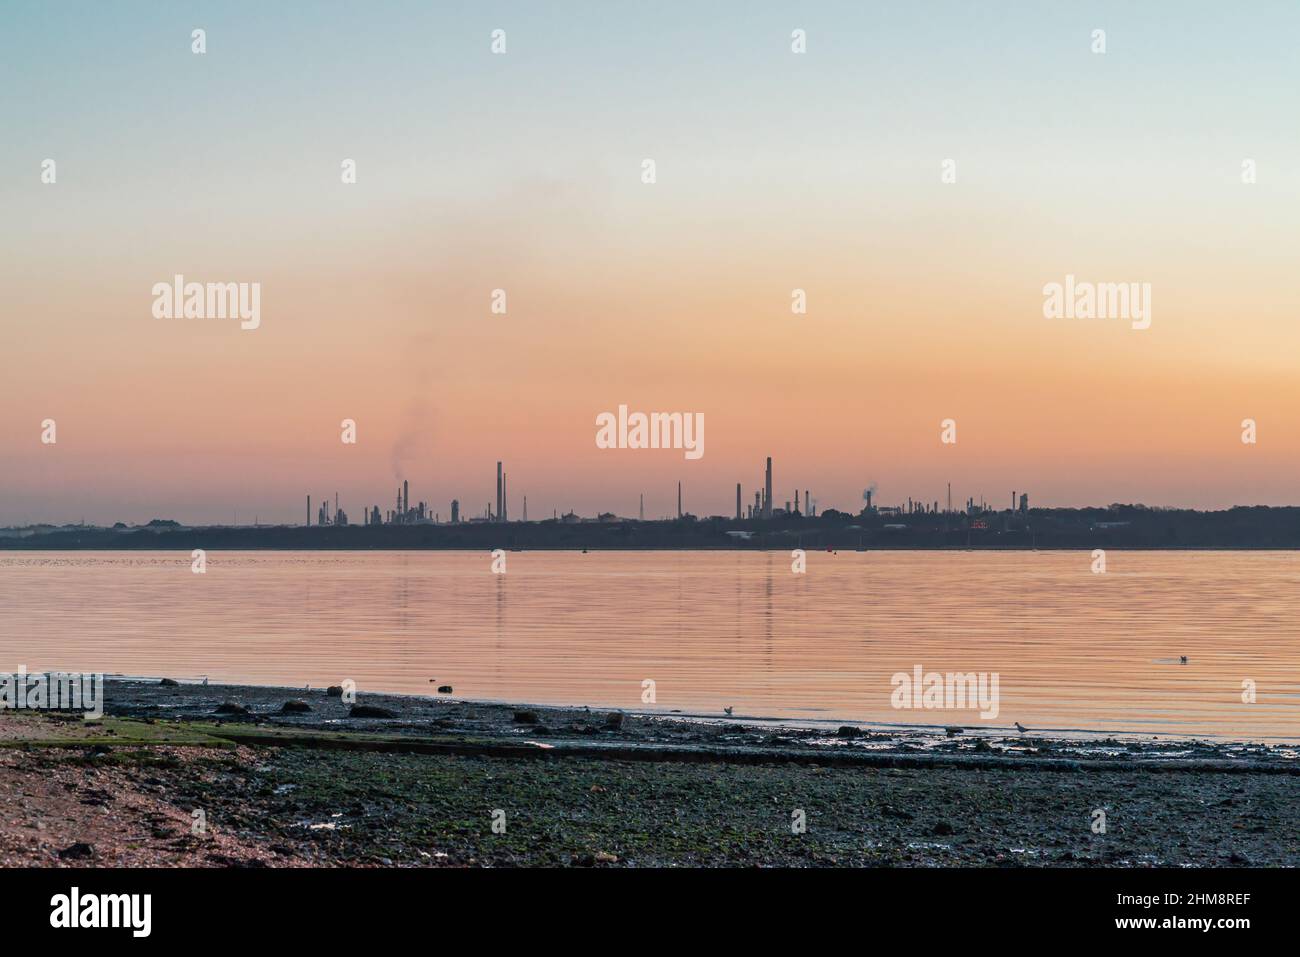 Fawley Oil Refinery during sunset as seen from Weston shore, Southampton, Hampshire, England, UK Stock Photo